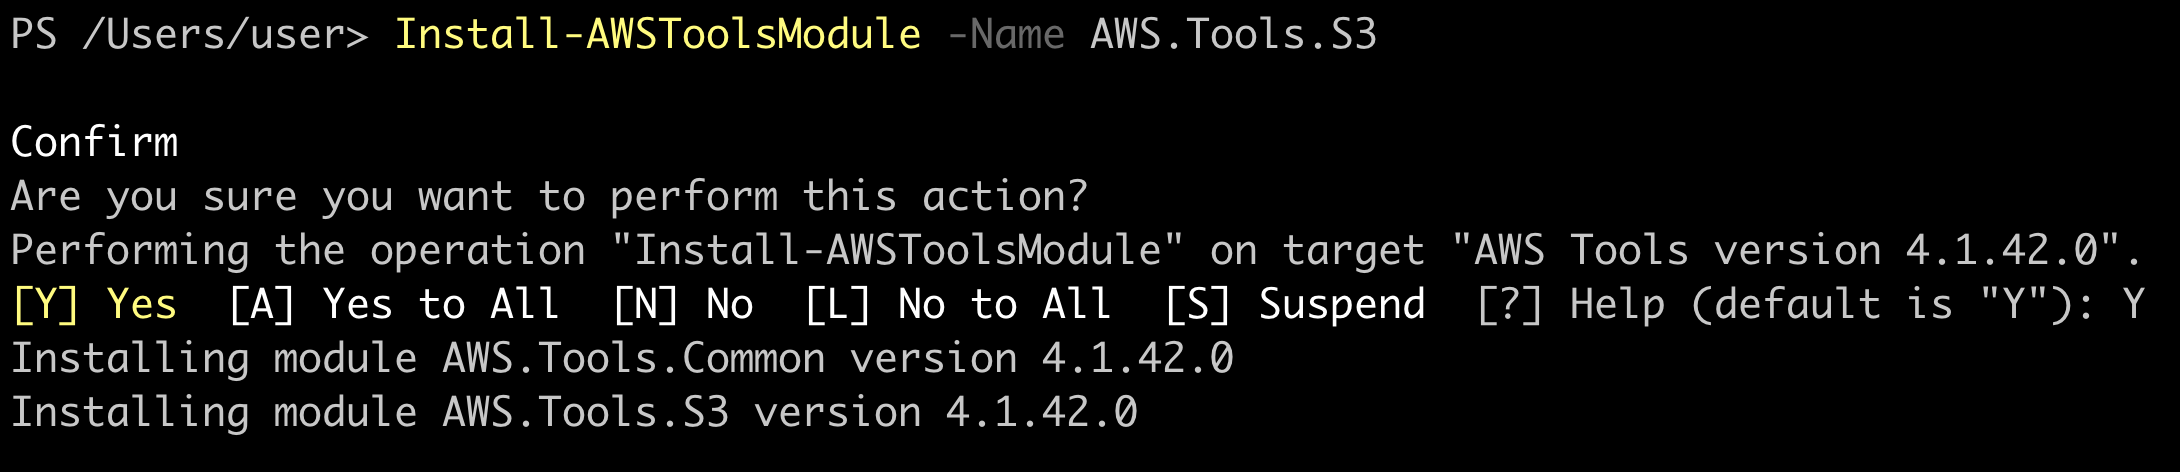 Installing the AWS.Tools.S3 module